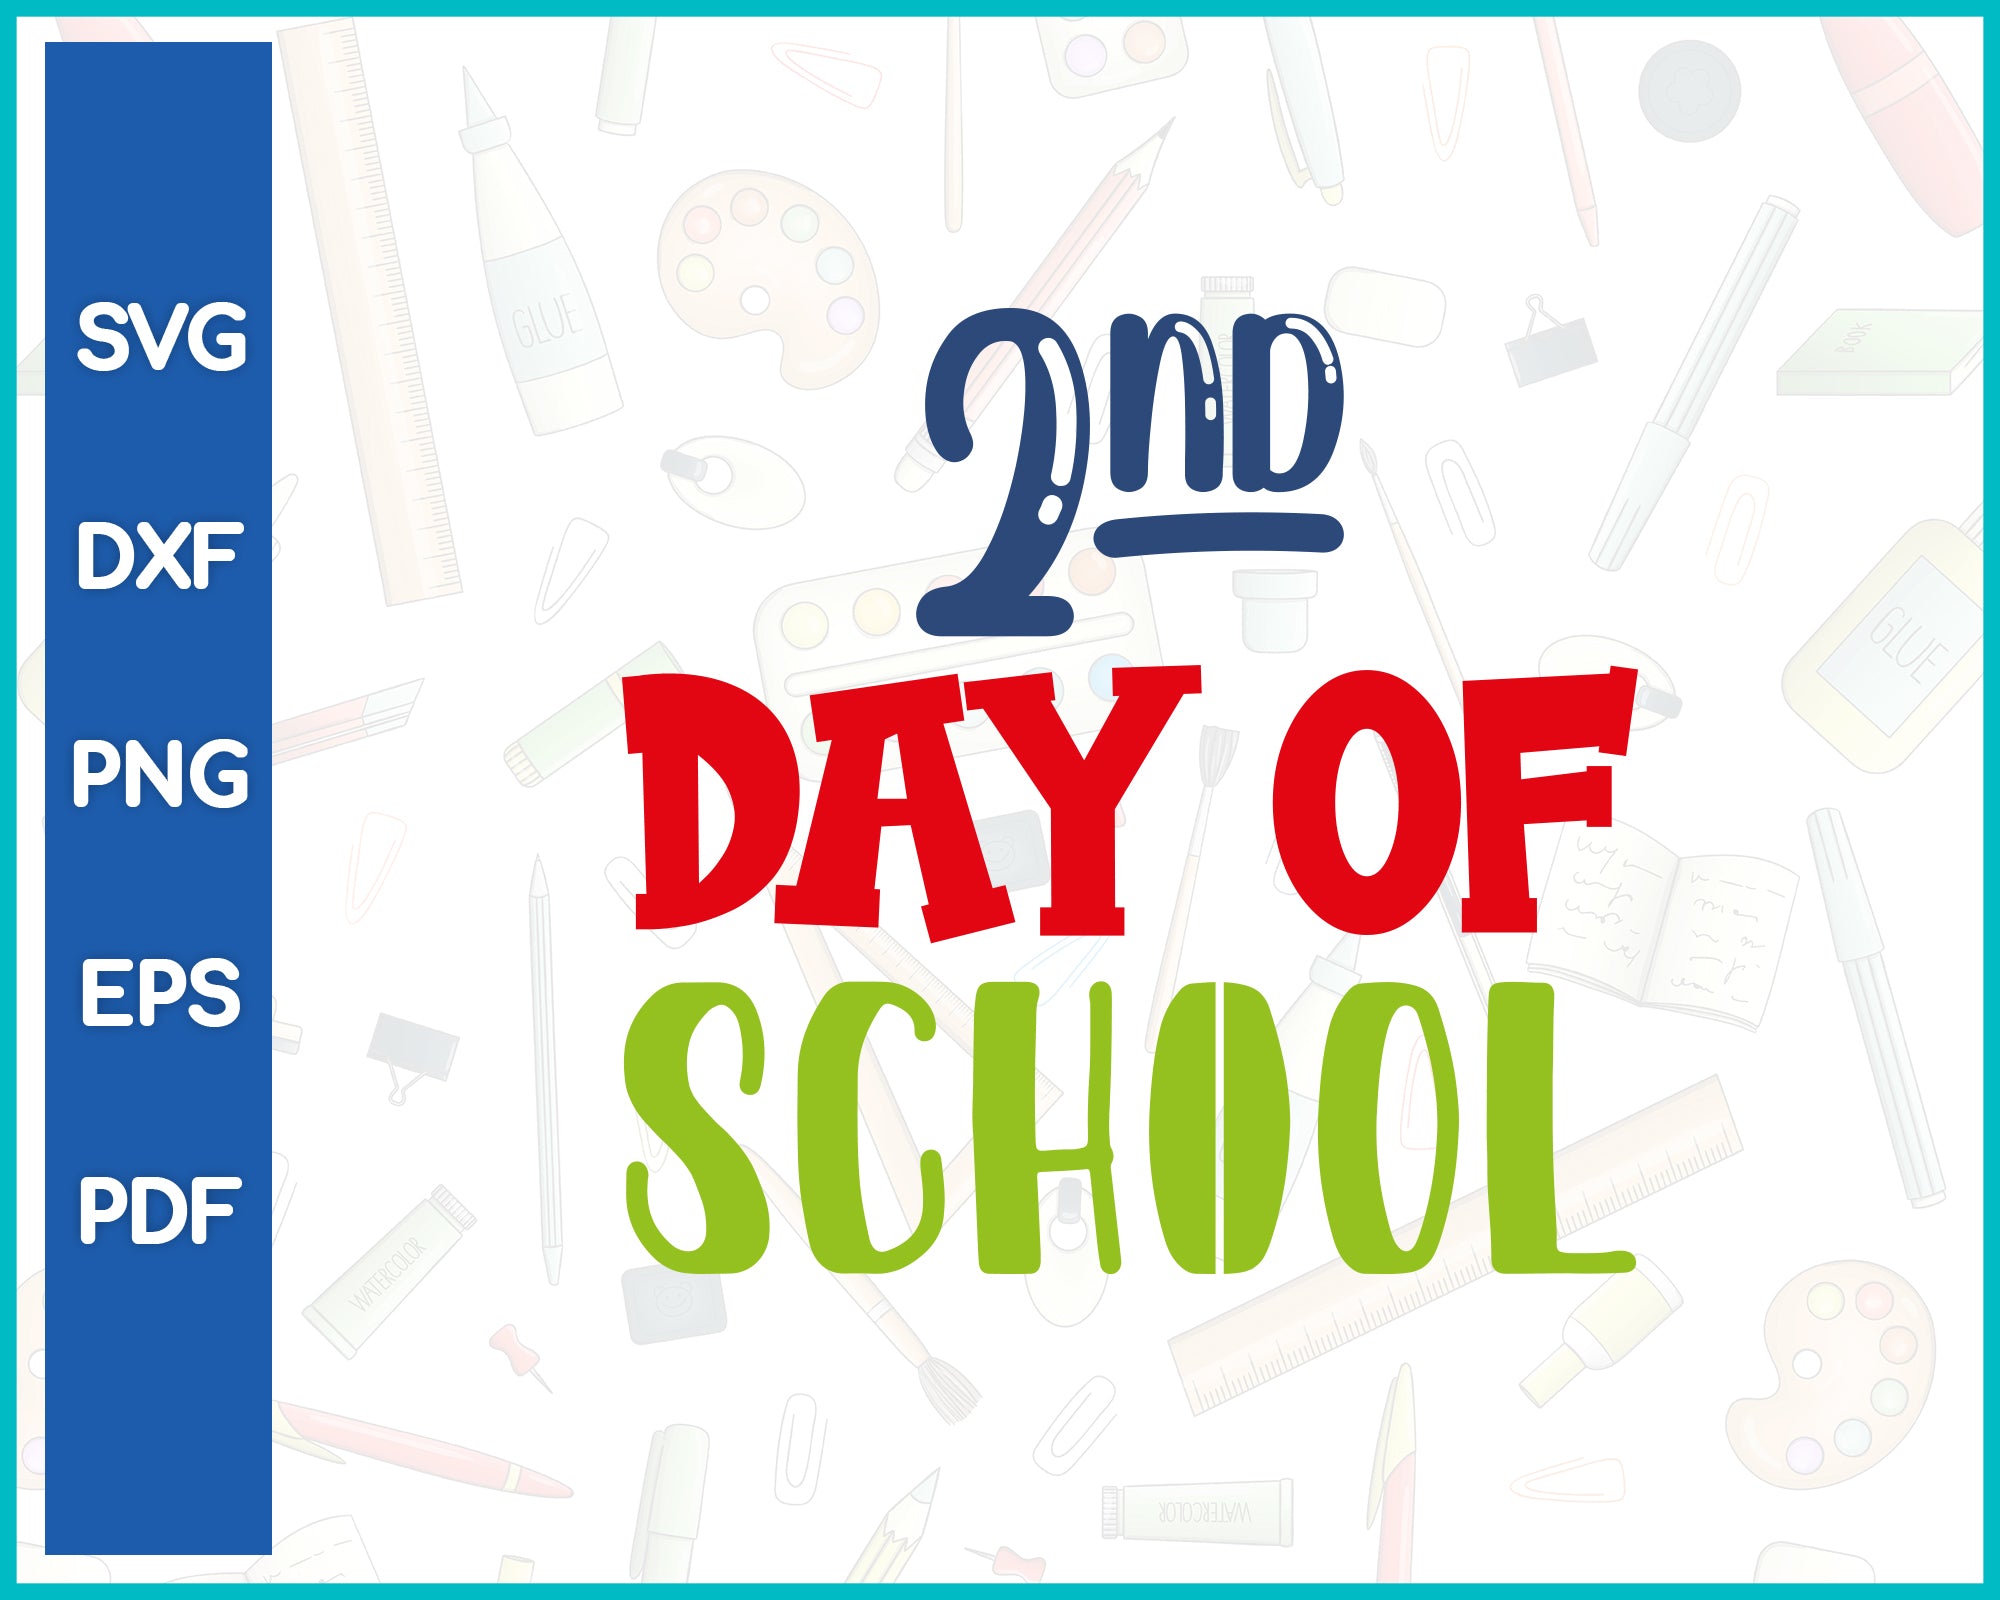 2nd Day Of School Teacher Cut File For Cricut svg, dxf, png, eps, pdf Silhouette Printable Files